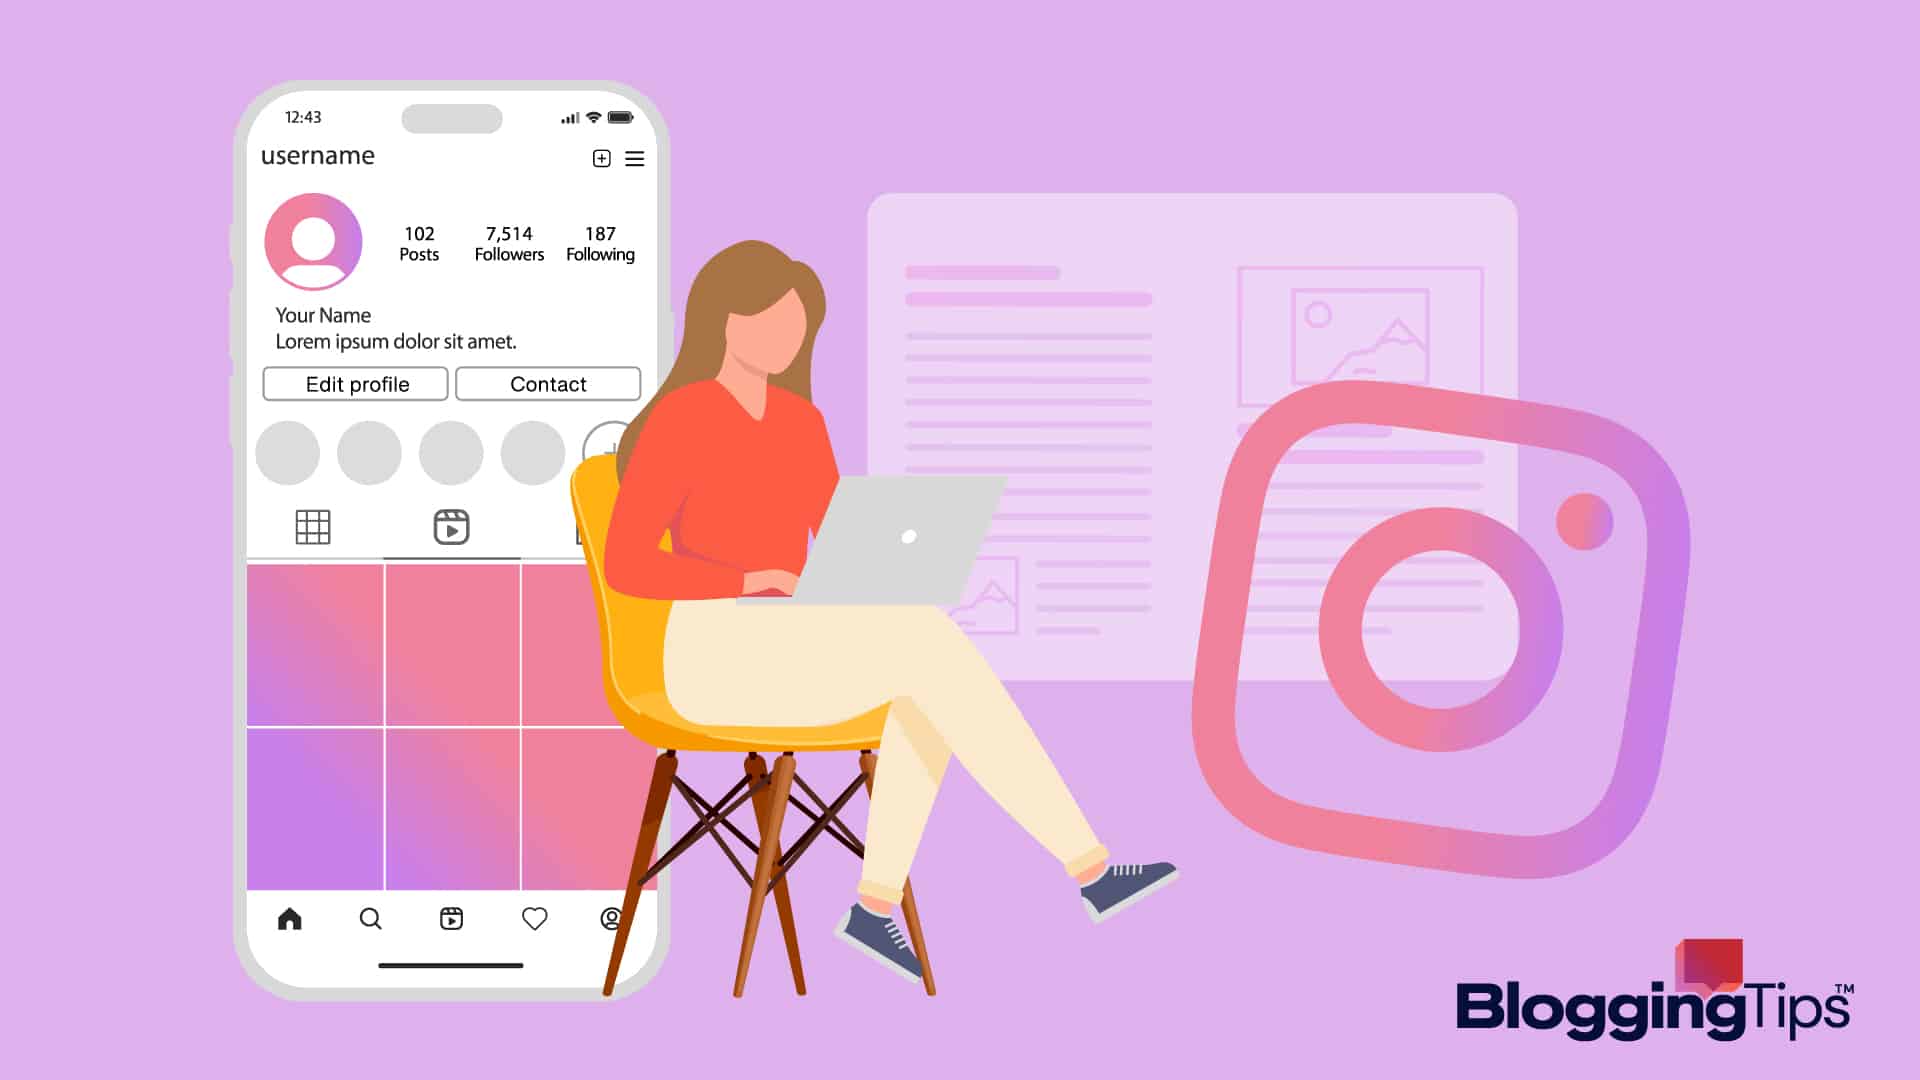 vector graphic showing an illustration of a woman learning how to start a blog on instagram